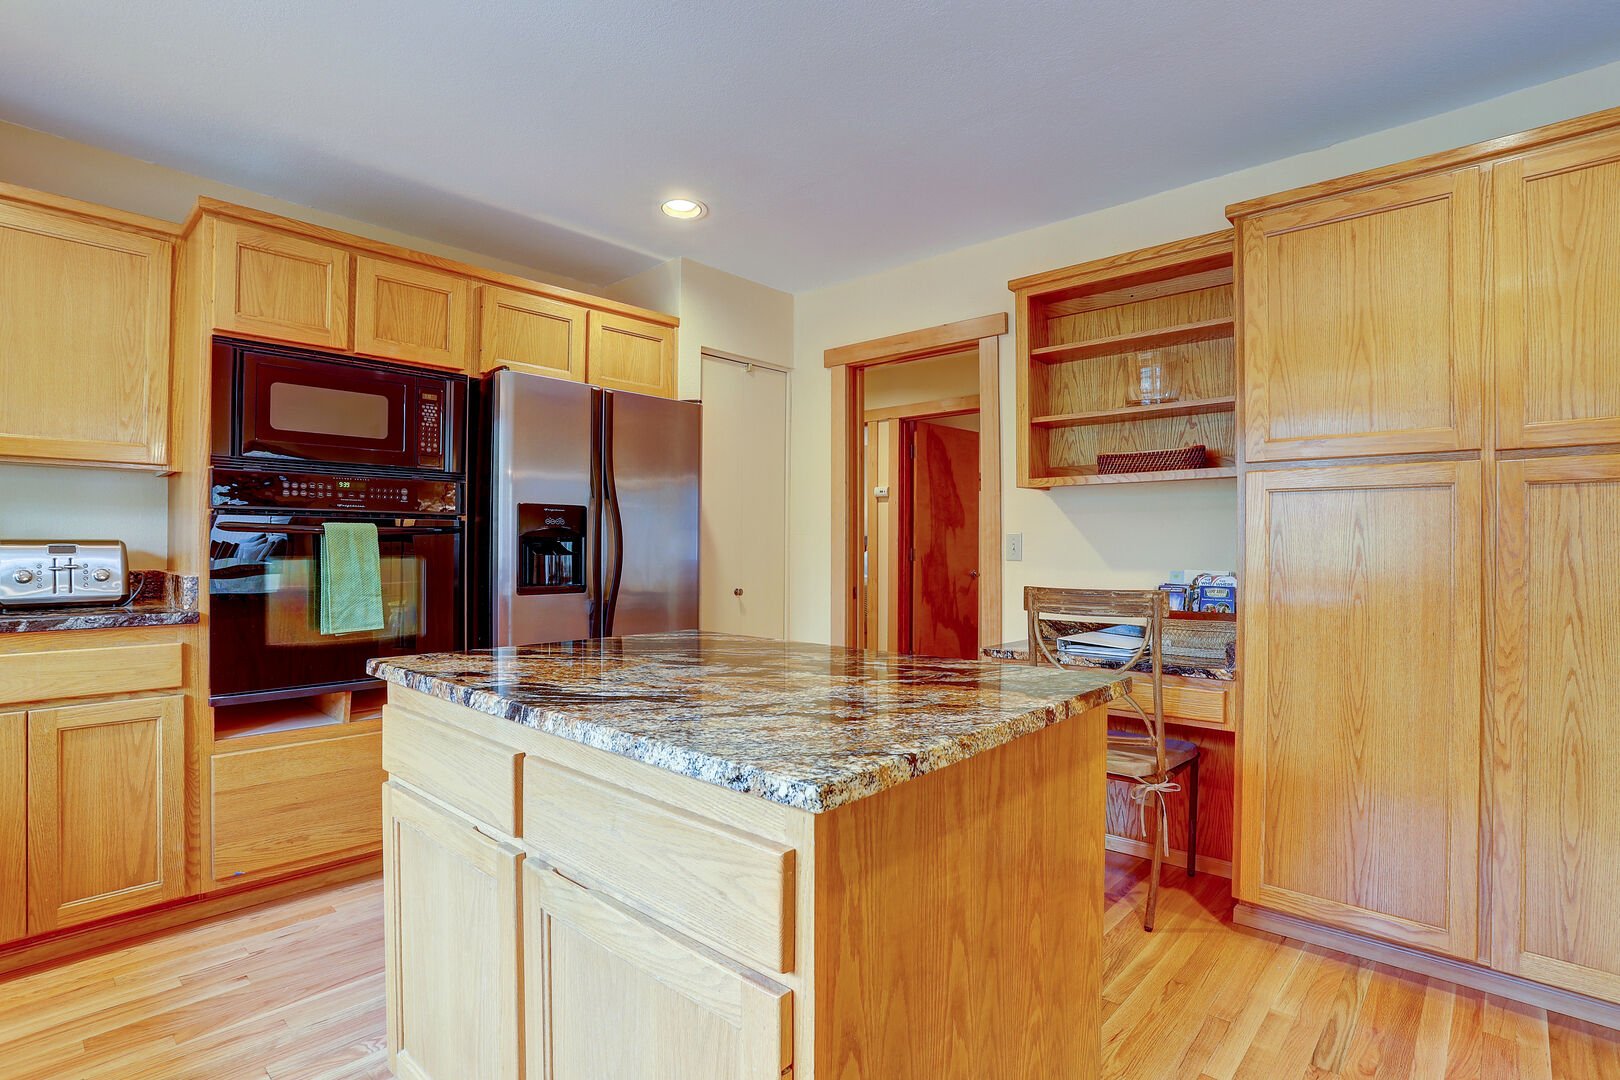 Granite topped central island in the kitchen.